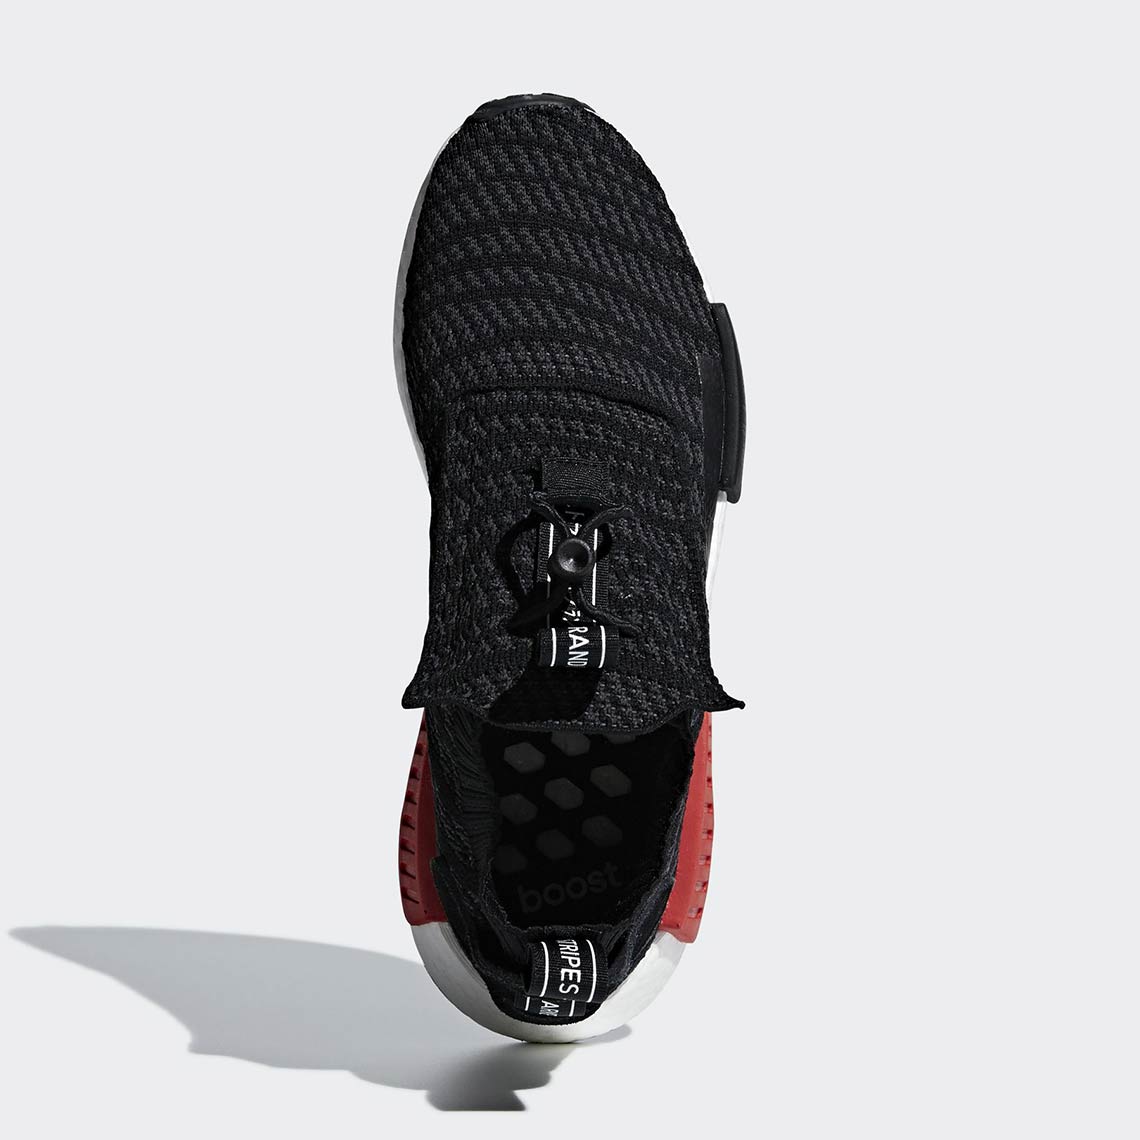 adidas NMD TS1 Bred B37634 Release Info 